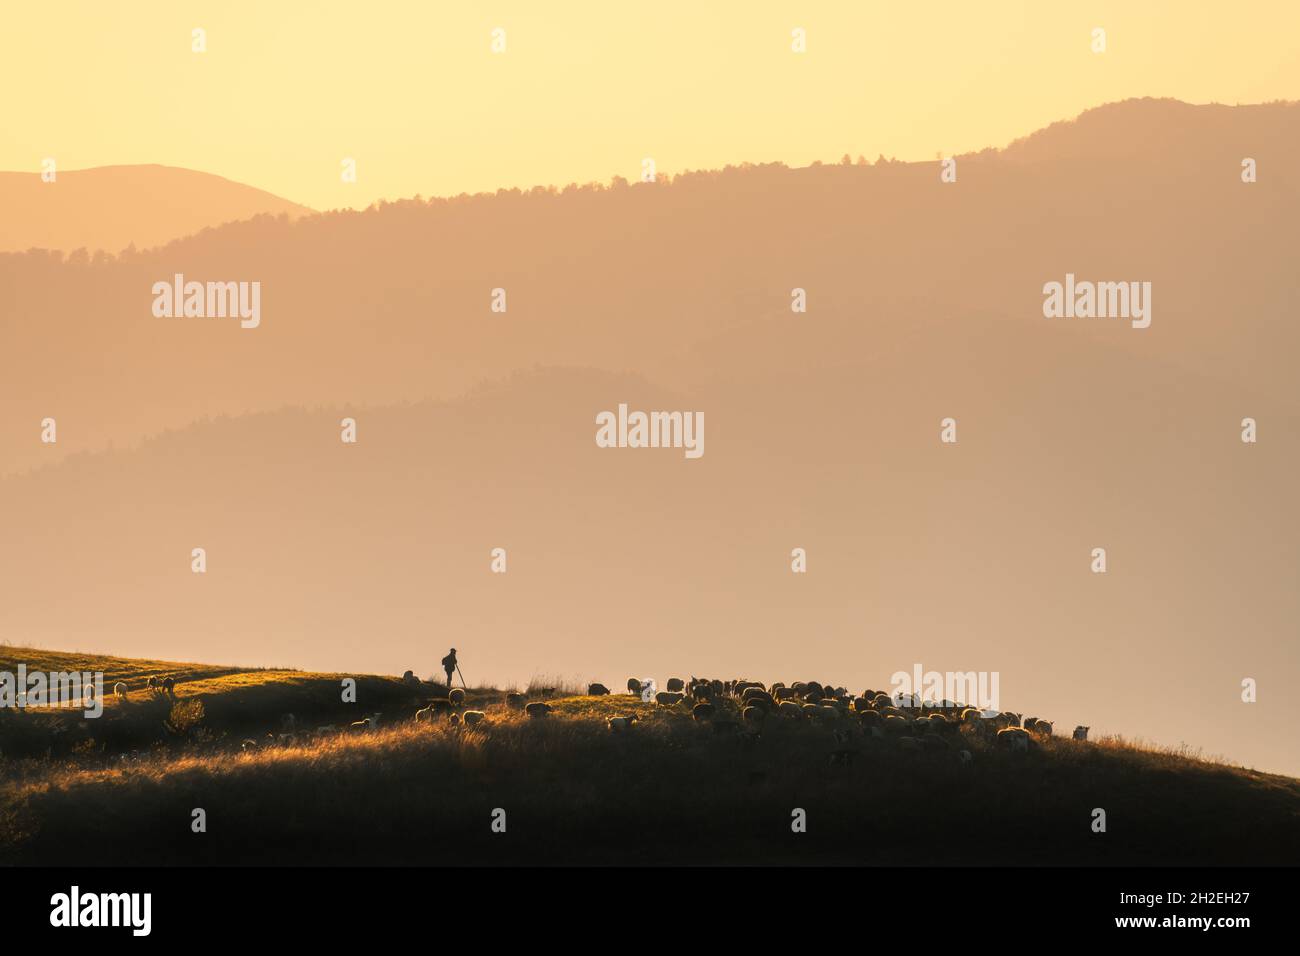 Silhouette of herdsman with herd of sheep, dogs on the hill Stock Photo